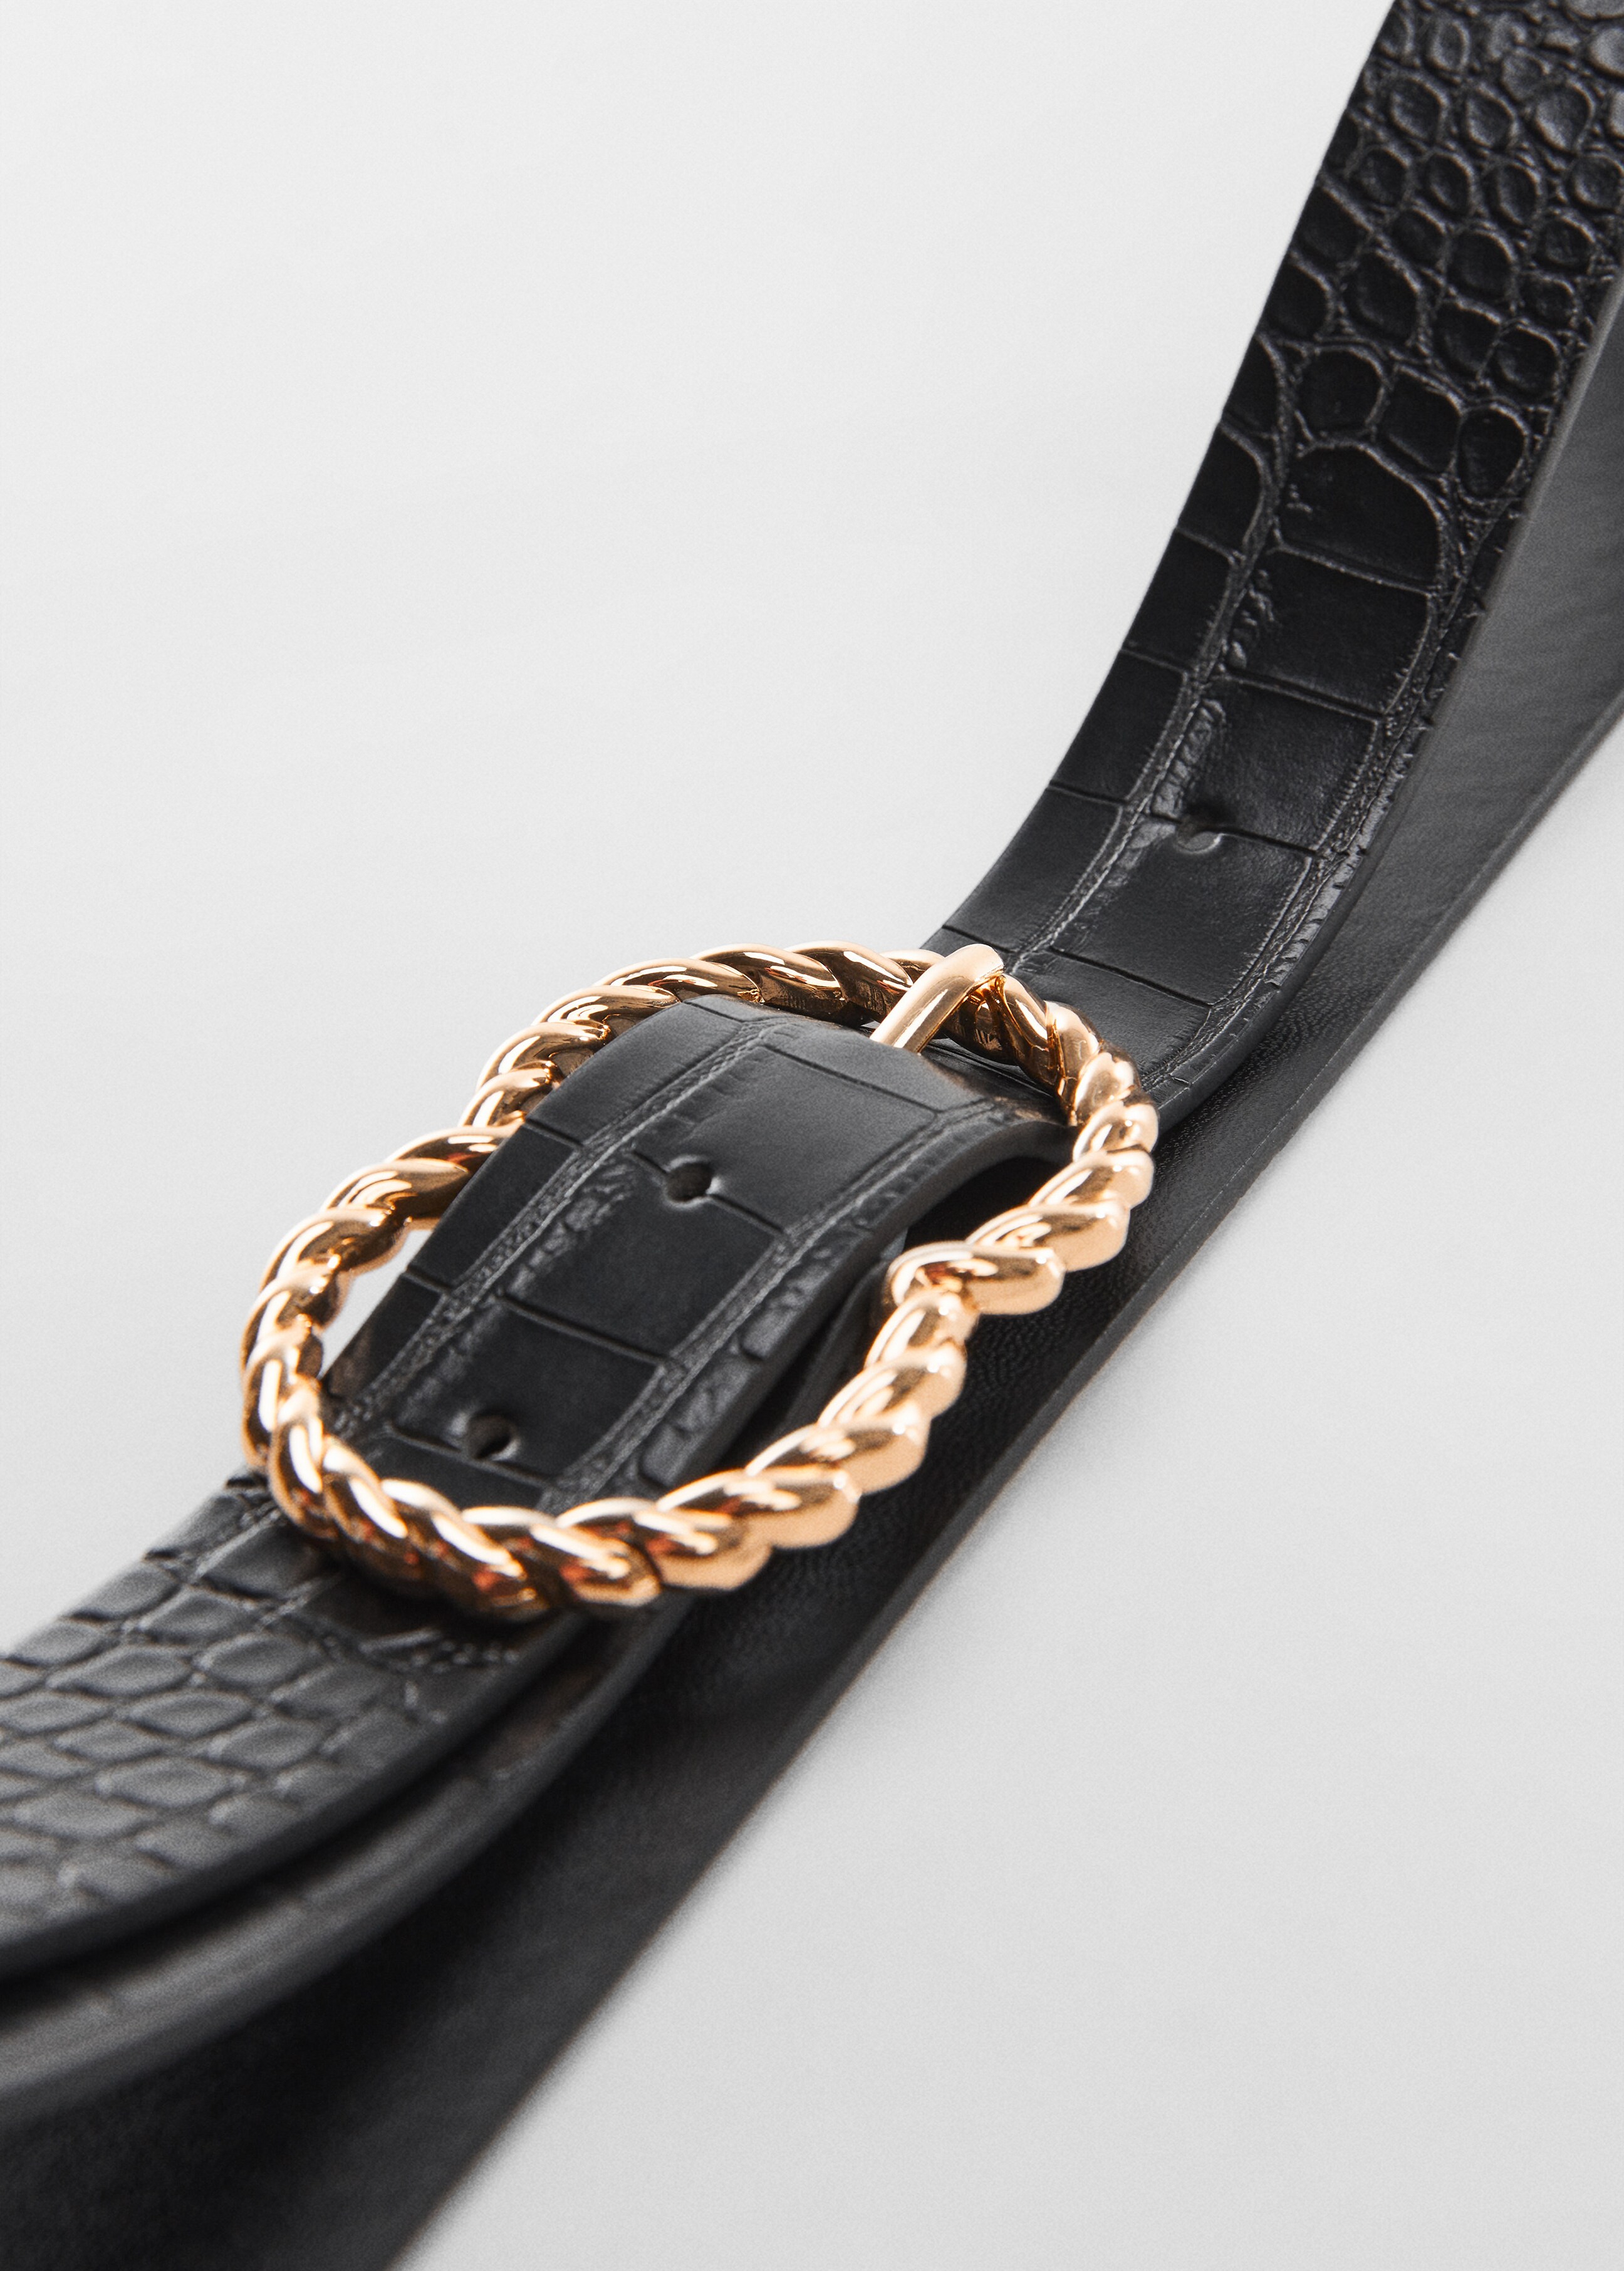 Braided belt with buckle - Details of the article 1